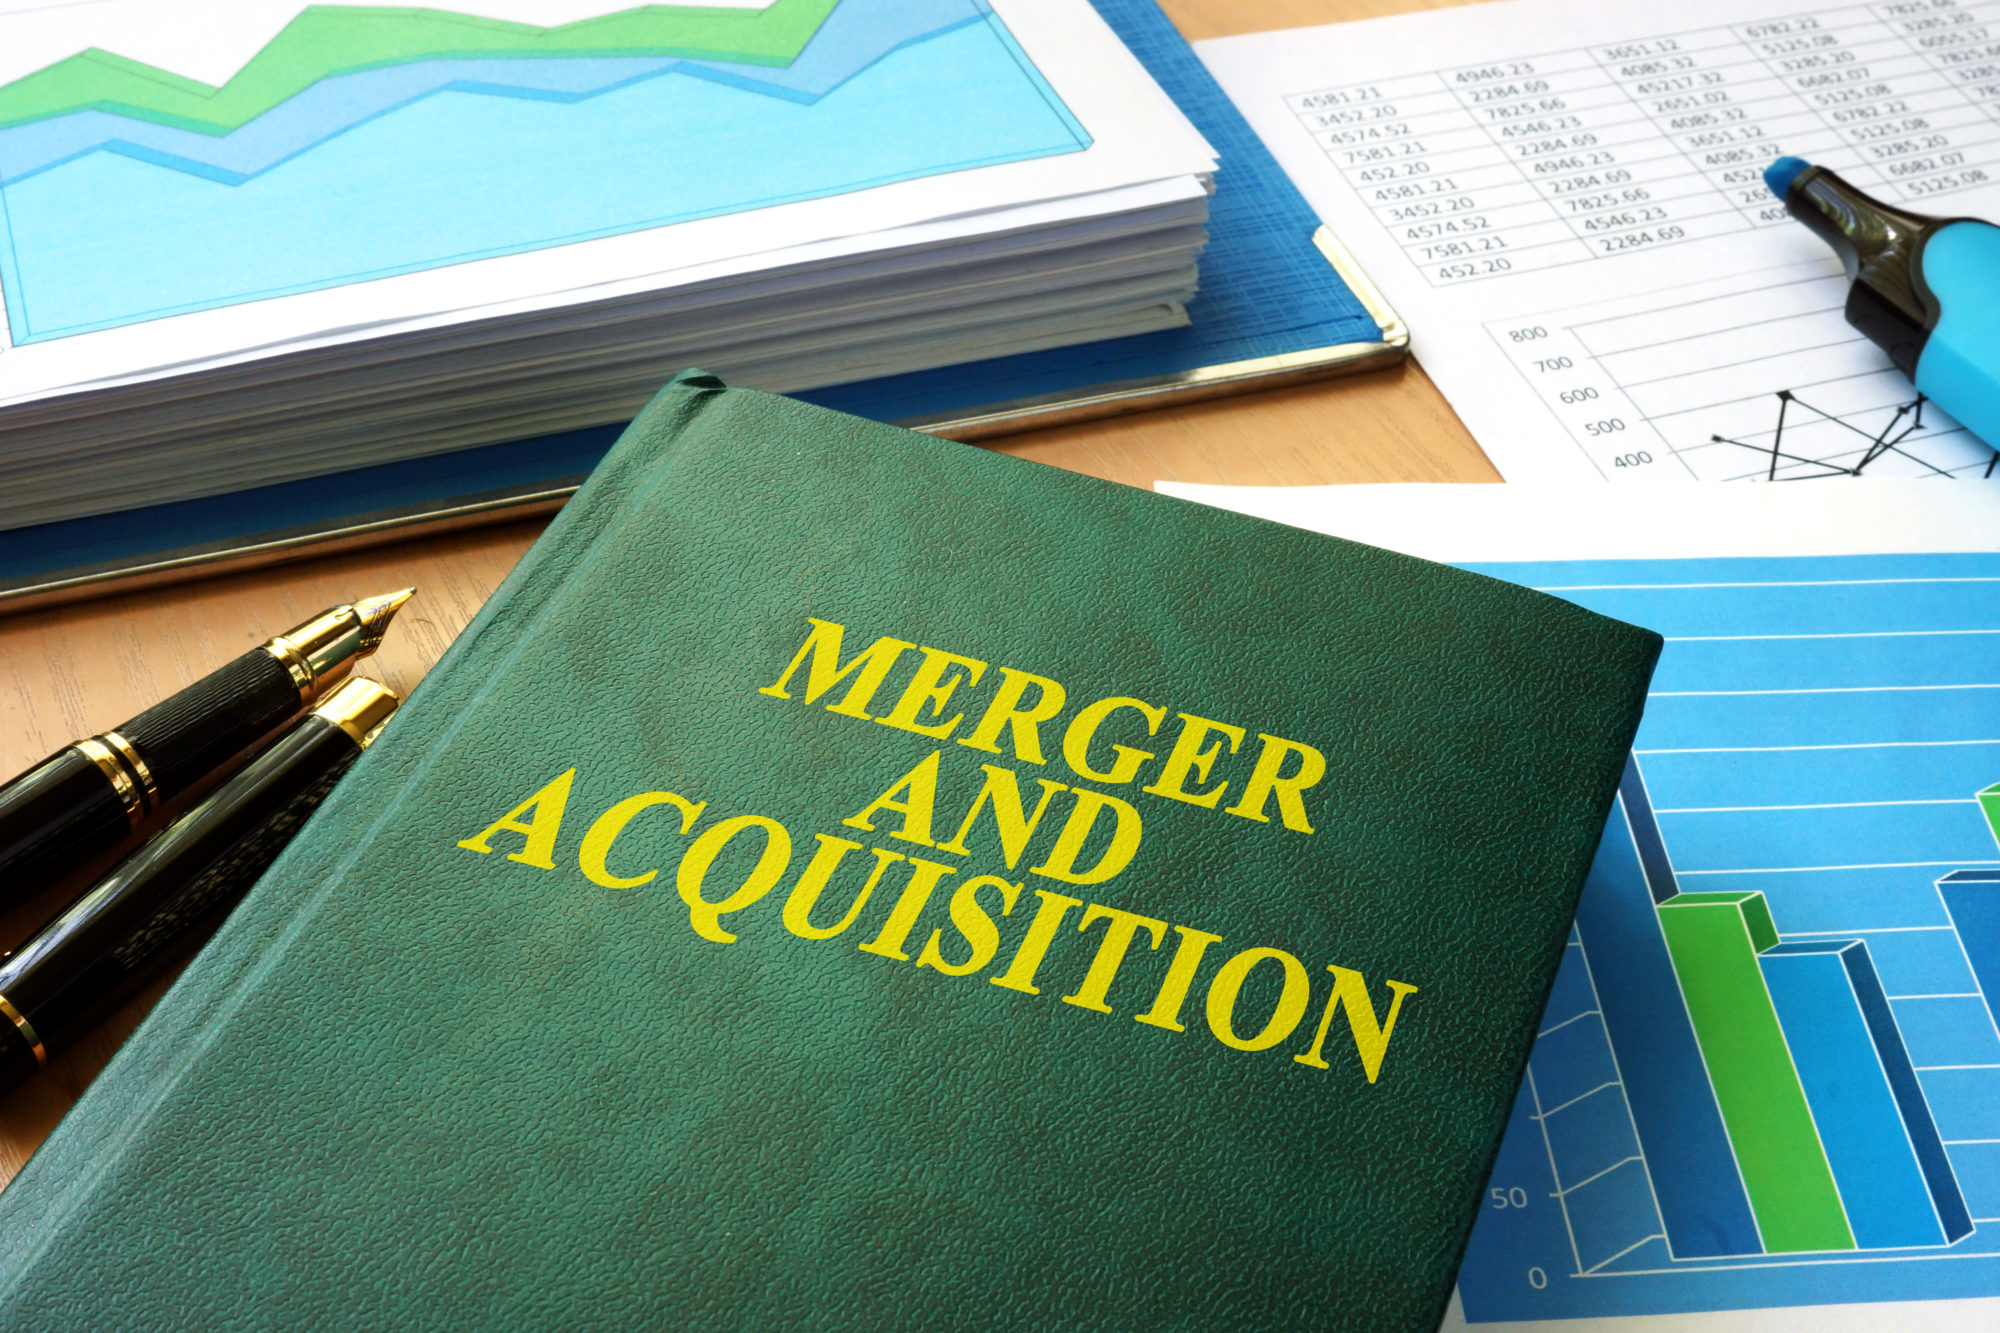 Dealer Acquisitions Update: is That All There Is?